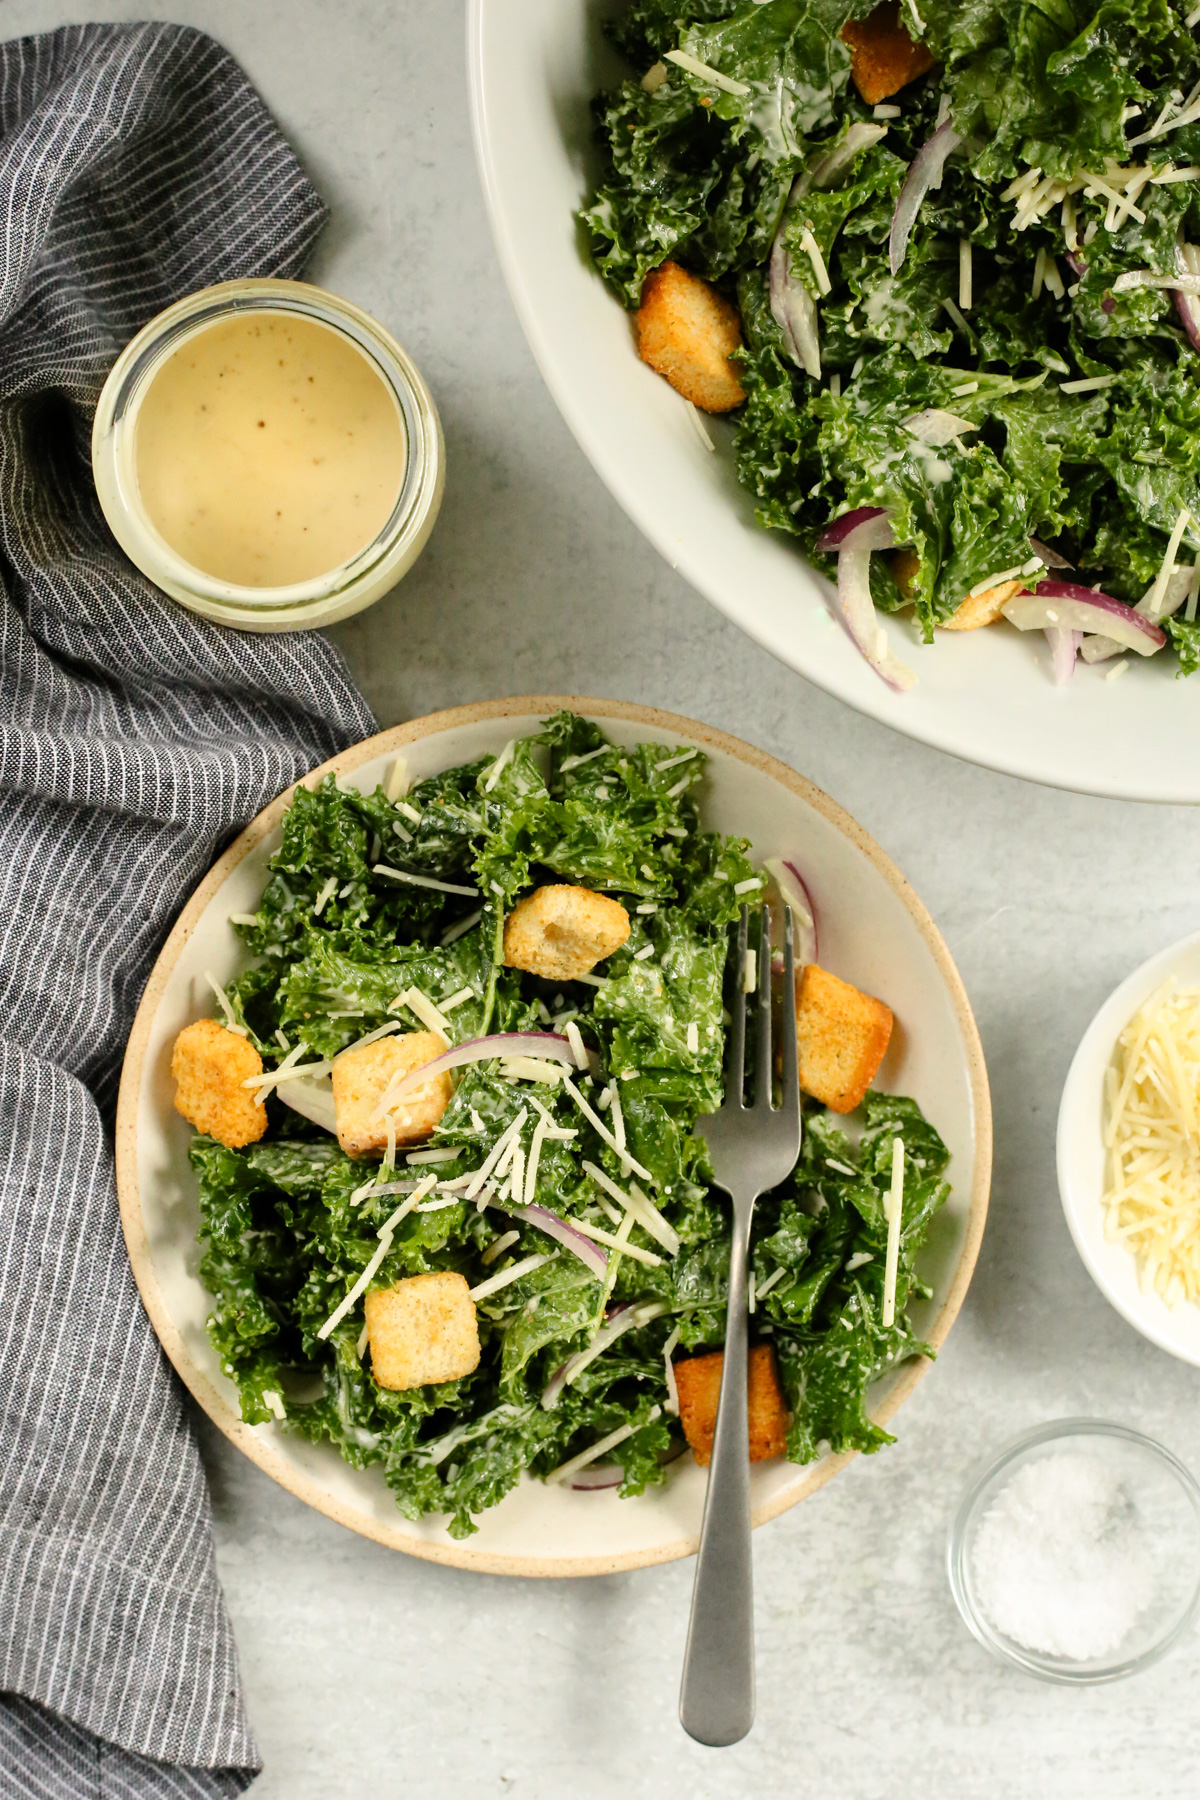 Overhead view of a salad plate piled high with a massaged kale caesar salad, topped with crunchy croutons with a silver fork arranged on the side of the plate